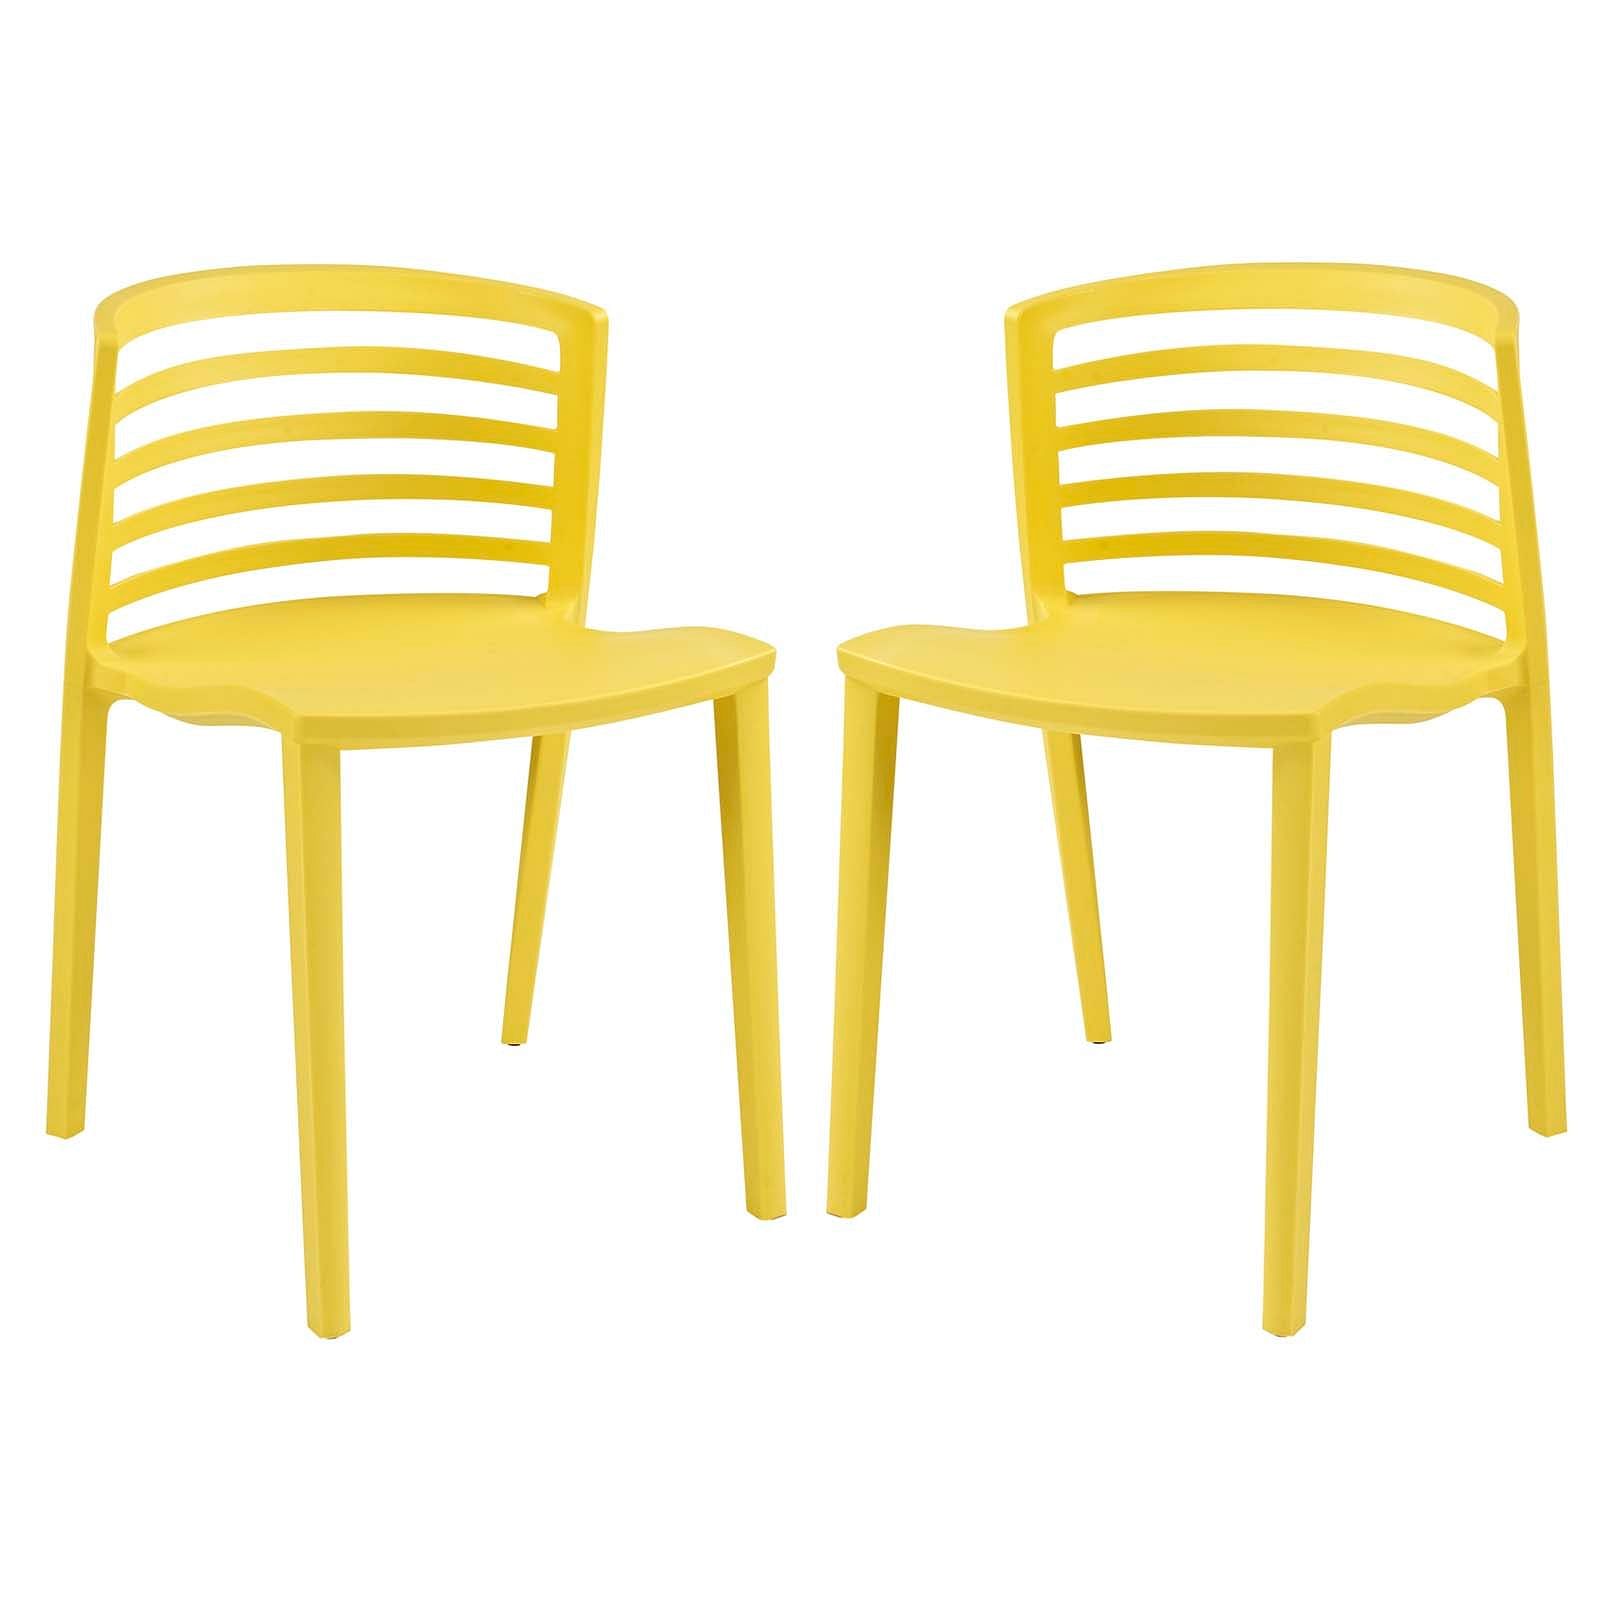 Curvy Dining Chairs Set of 2